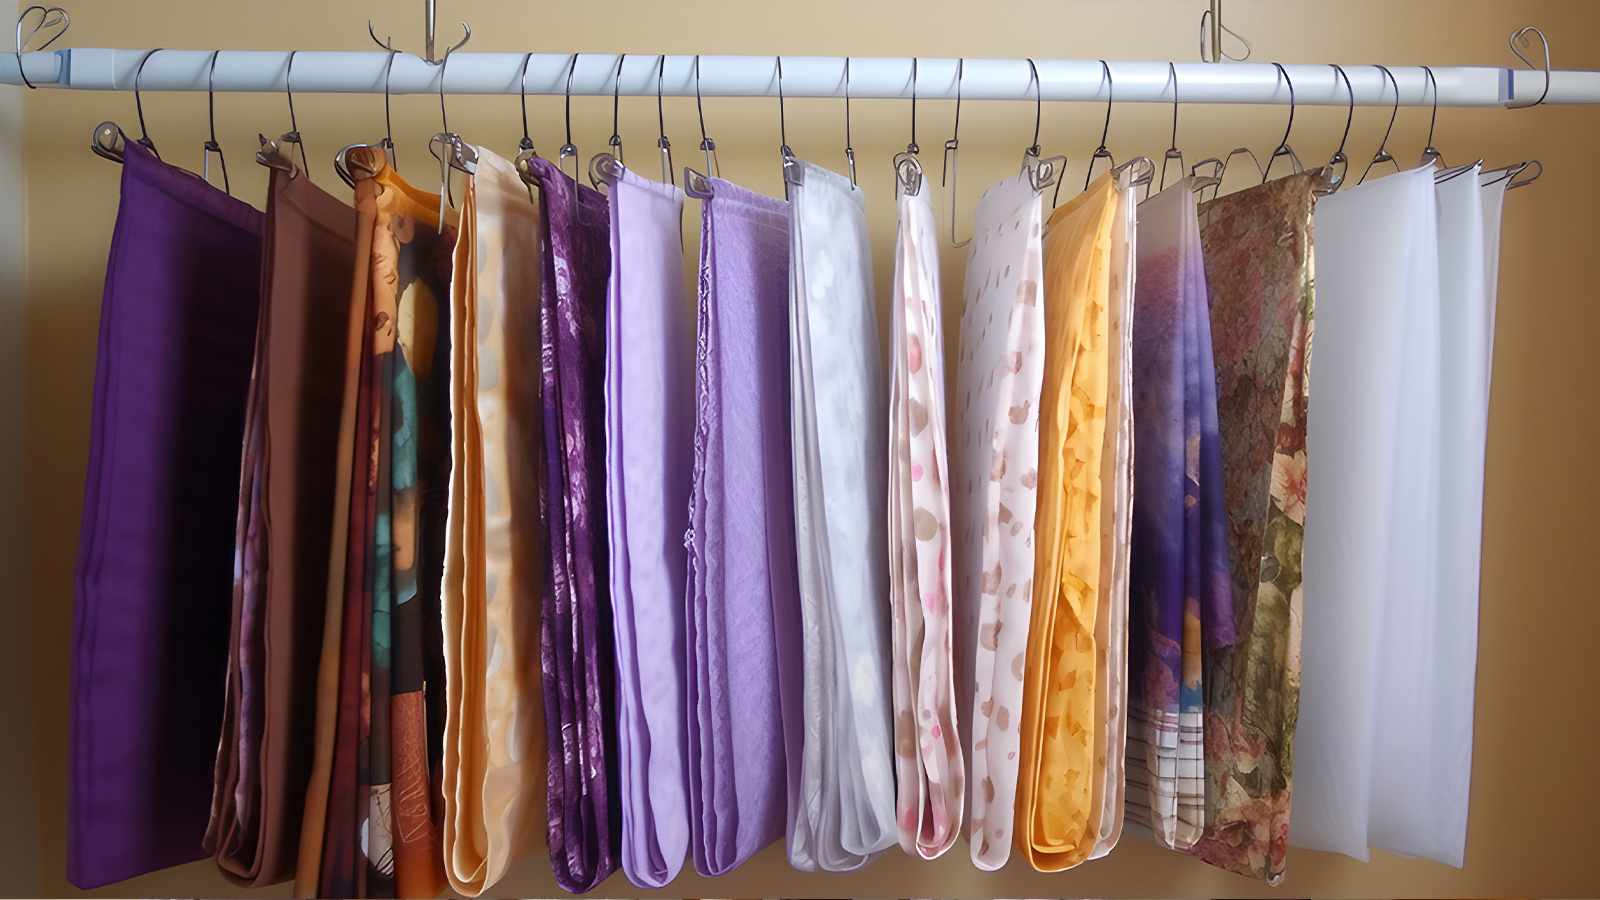 A bunch of different colored fabric hanging on a rack.